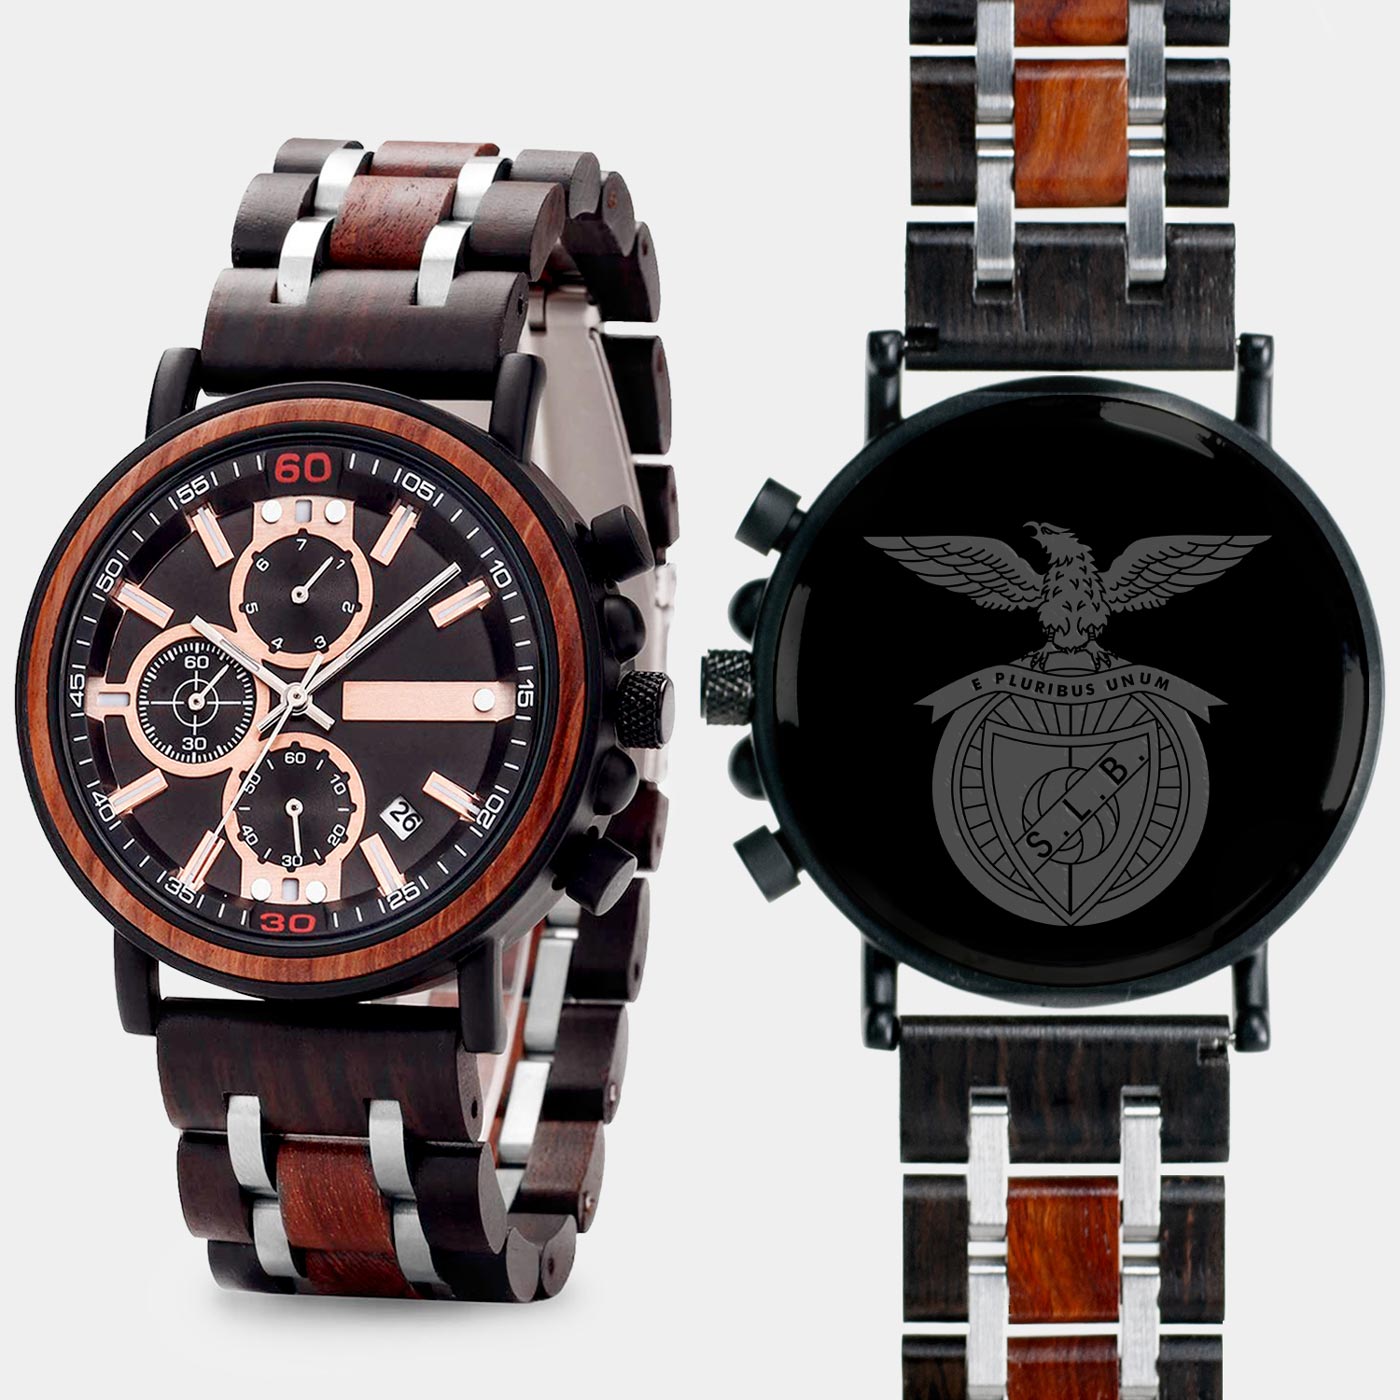 S.L. Benfica Mens Wrist Watch  - Personalized S.L. Benfica Mens Watches - Custom Gifts For Him, Birthday Gifts, Gift For Dad - Best 2022 S.L. Benfica Christmas Gifts - Black 45mm FC Wood Watch